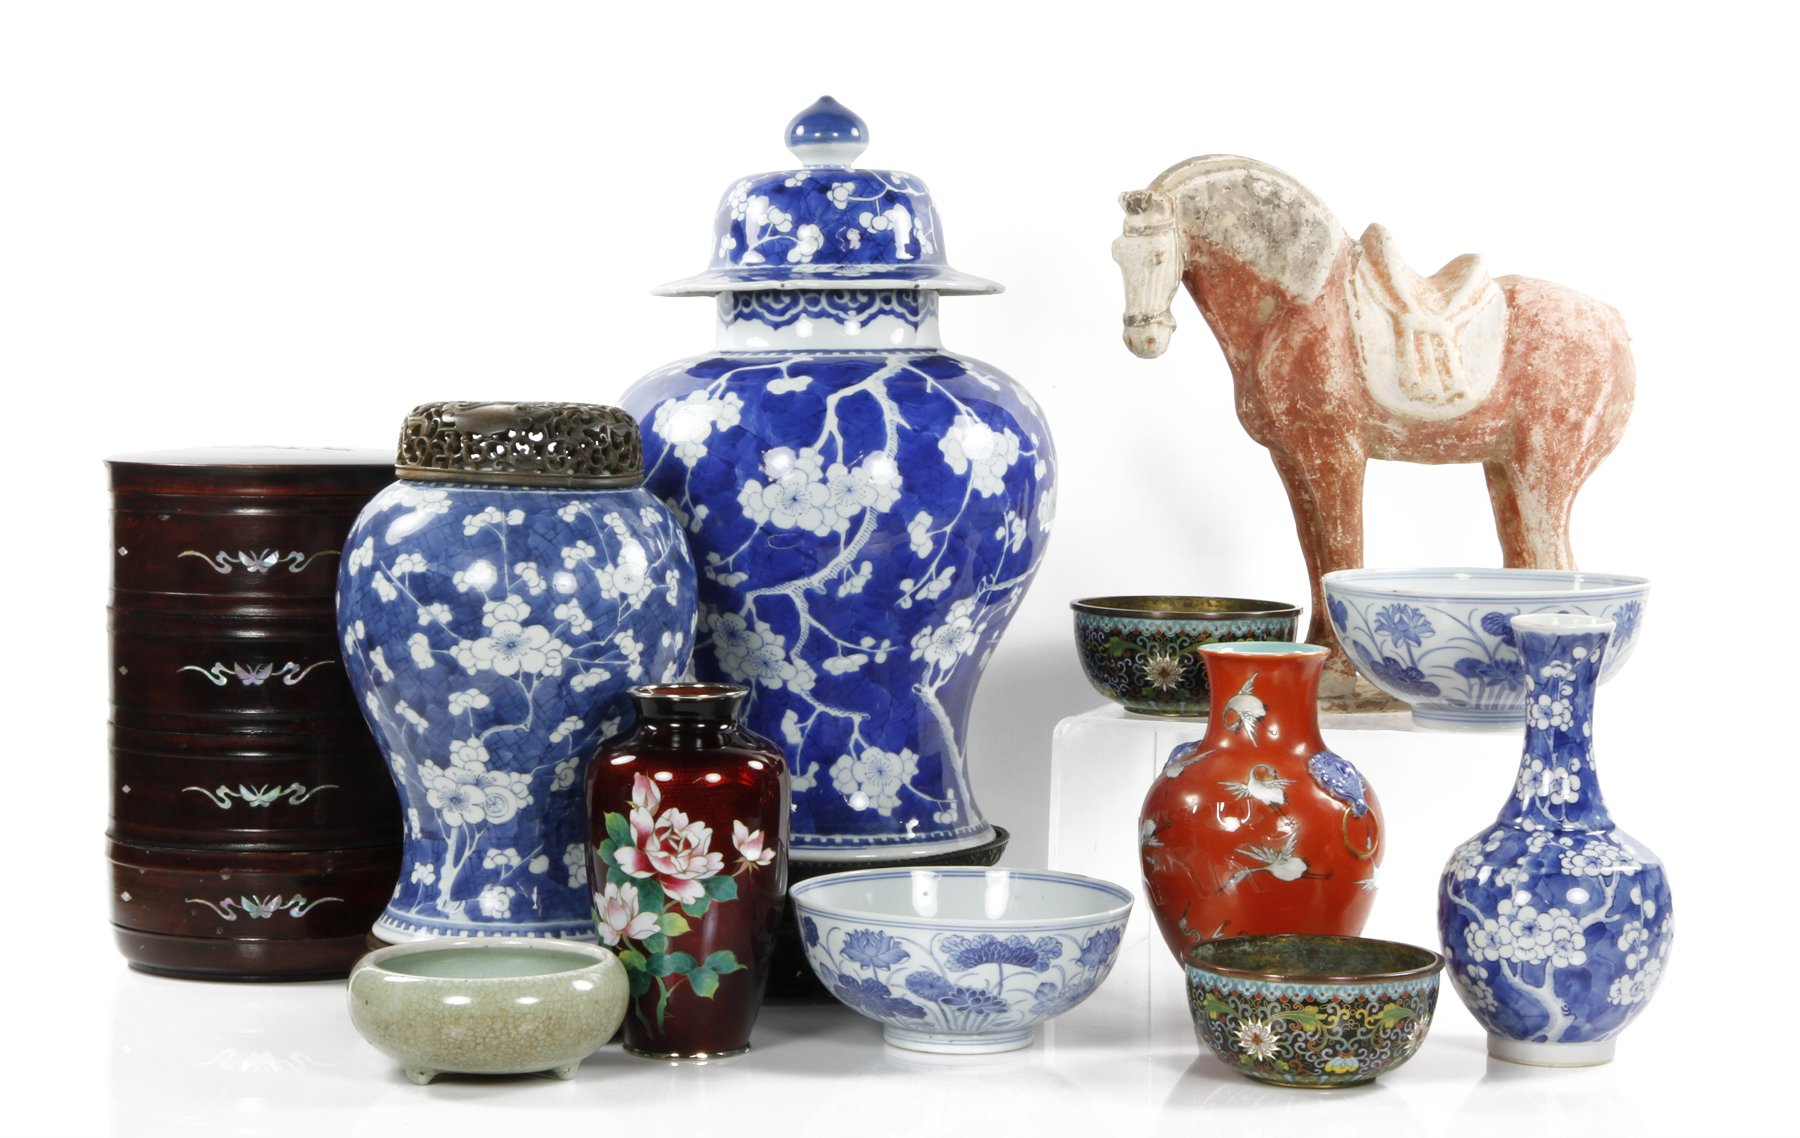 A selection of ceramics that will feature in the auction